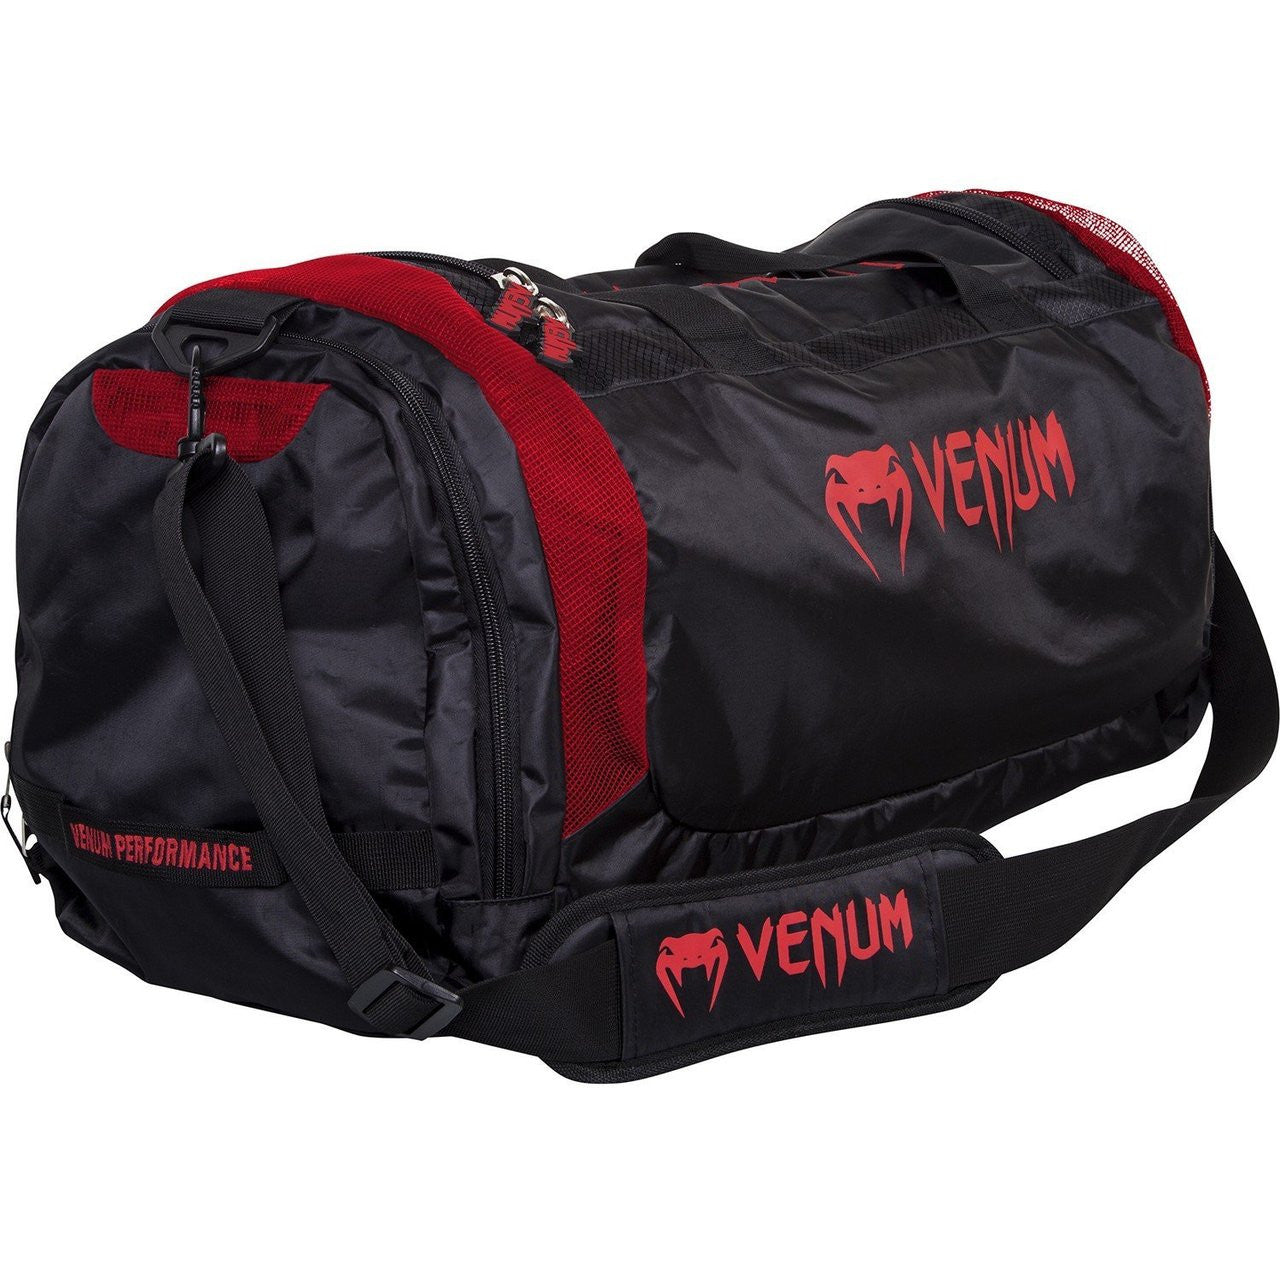 Trainer Lite Sports Bag-Red